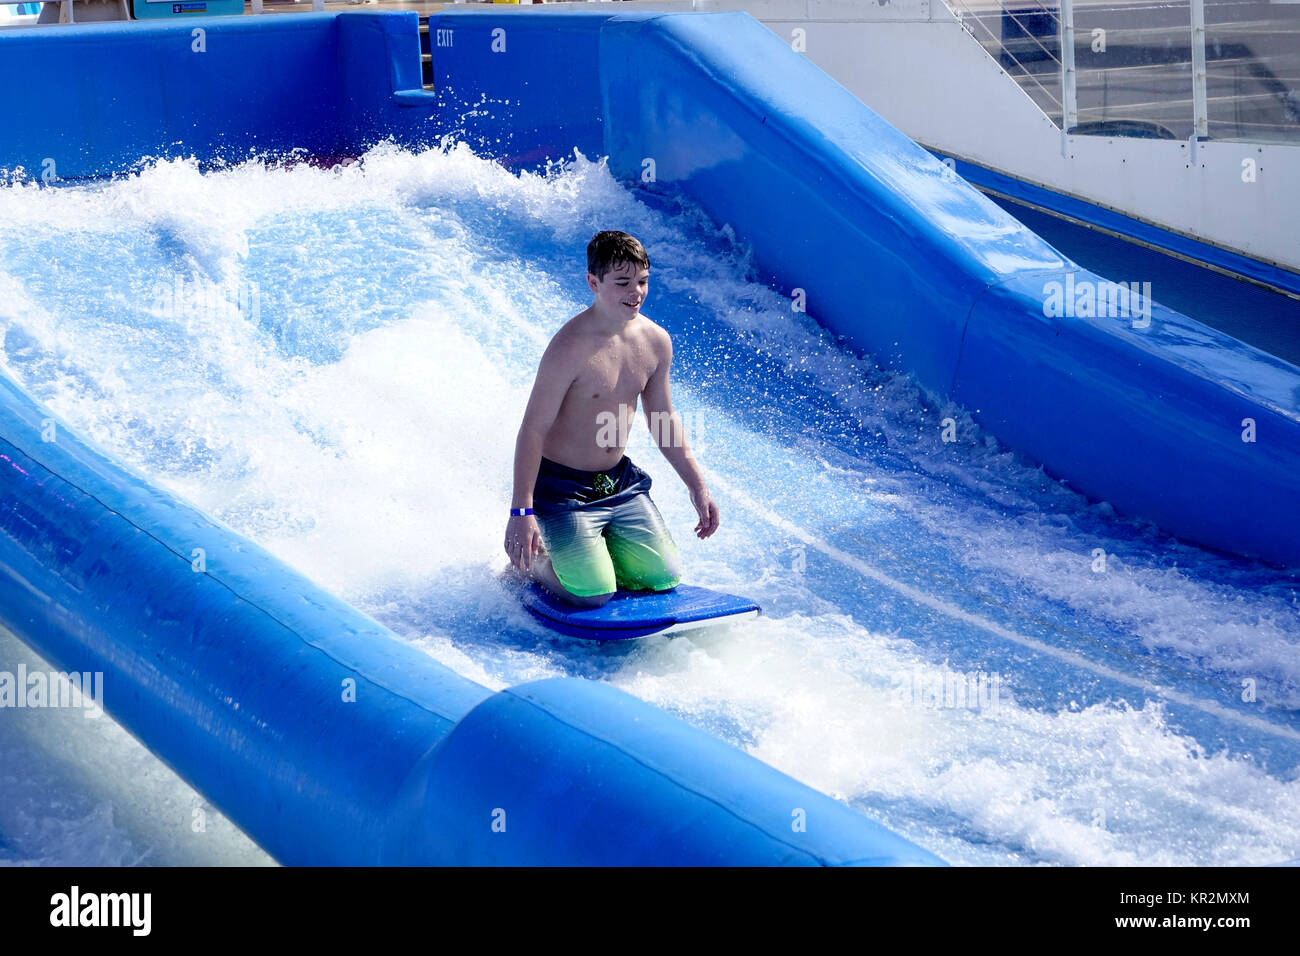 A young boy tries his luck on Royal Caribbean's Liberty of the Seas Flowrider amenity. Stock Photo